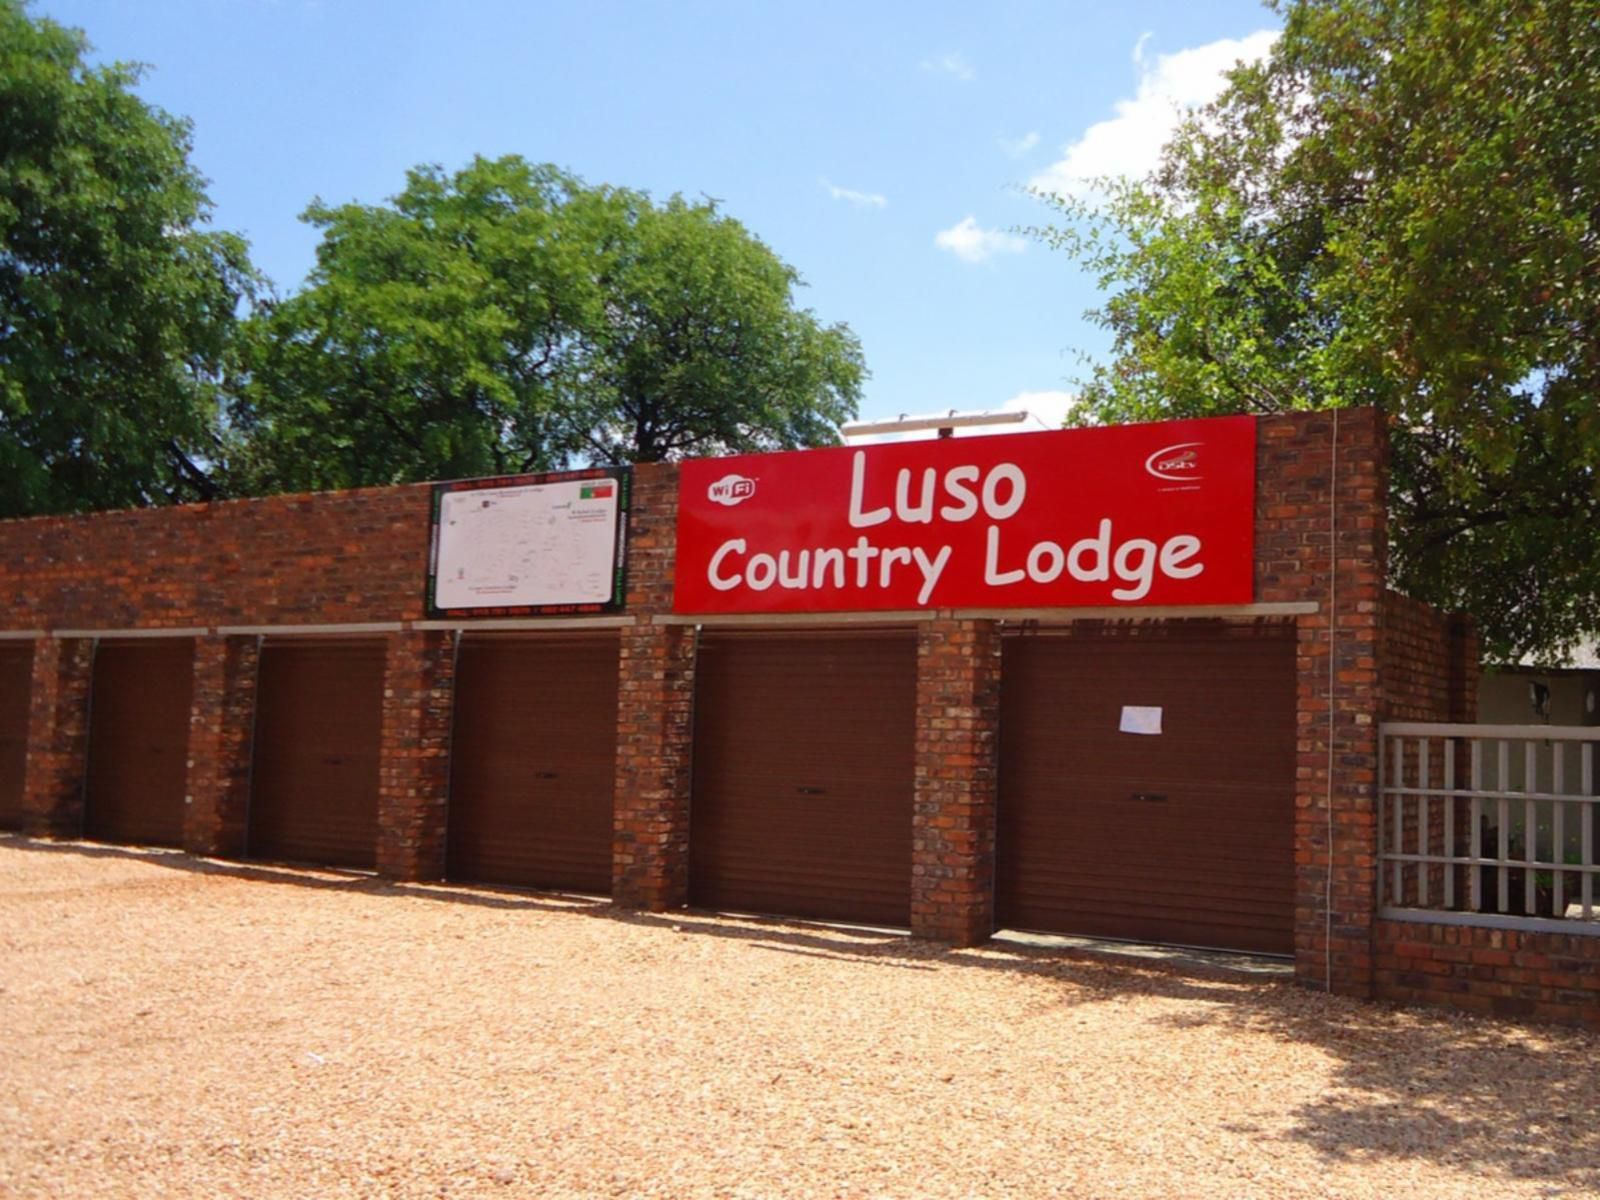 Luso Country Lodge Phalaborwa Limpopo Province South Africa Complementary Colors